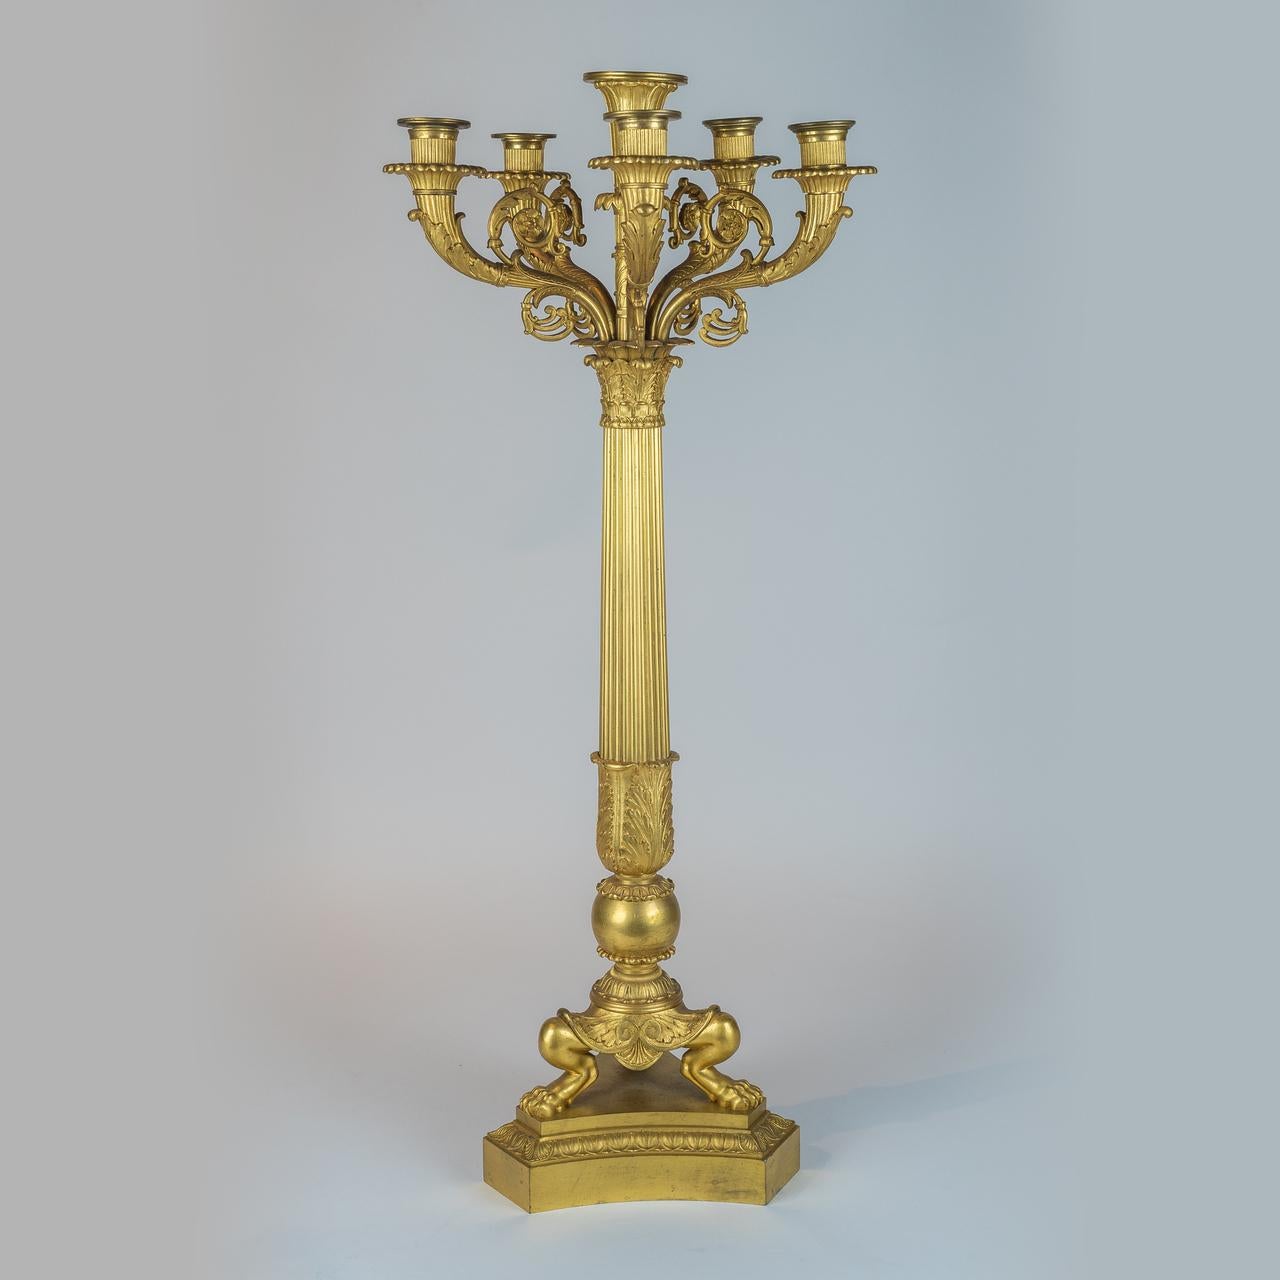 The candelabras are raised on fluted columns which terminate in finely chased capitals and are supported on a tripartite base raised on lion paw feet and mounted to a conforming platform base.

Origin: French
Date: circa 1825
Dimension: 27 in